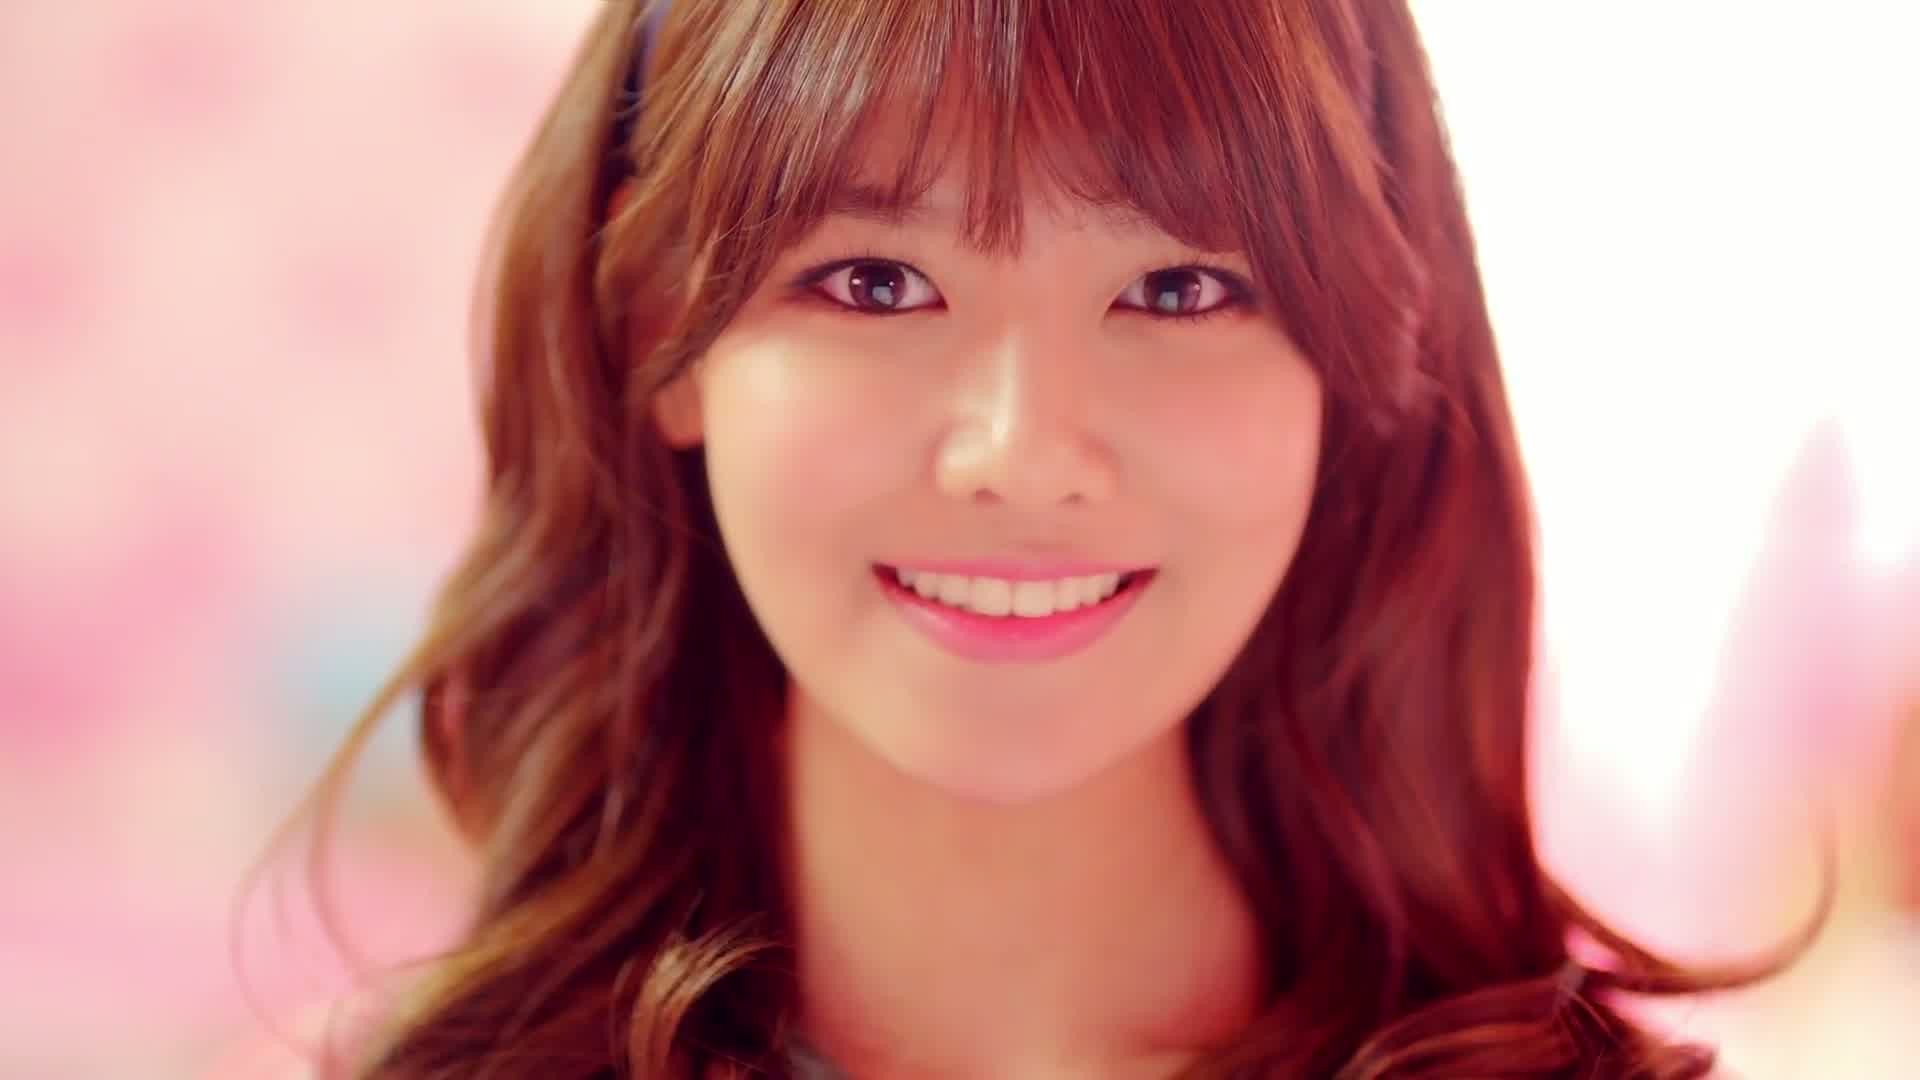 1920x1080 Search Results for “sooyoung i got a boy wallpaper” – Adorable Wallpapers